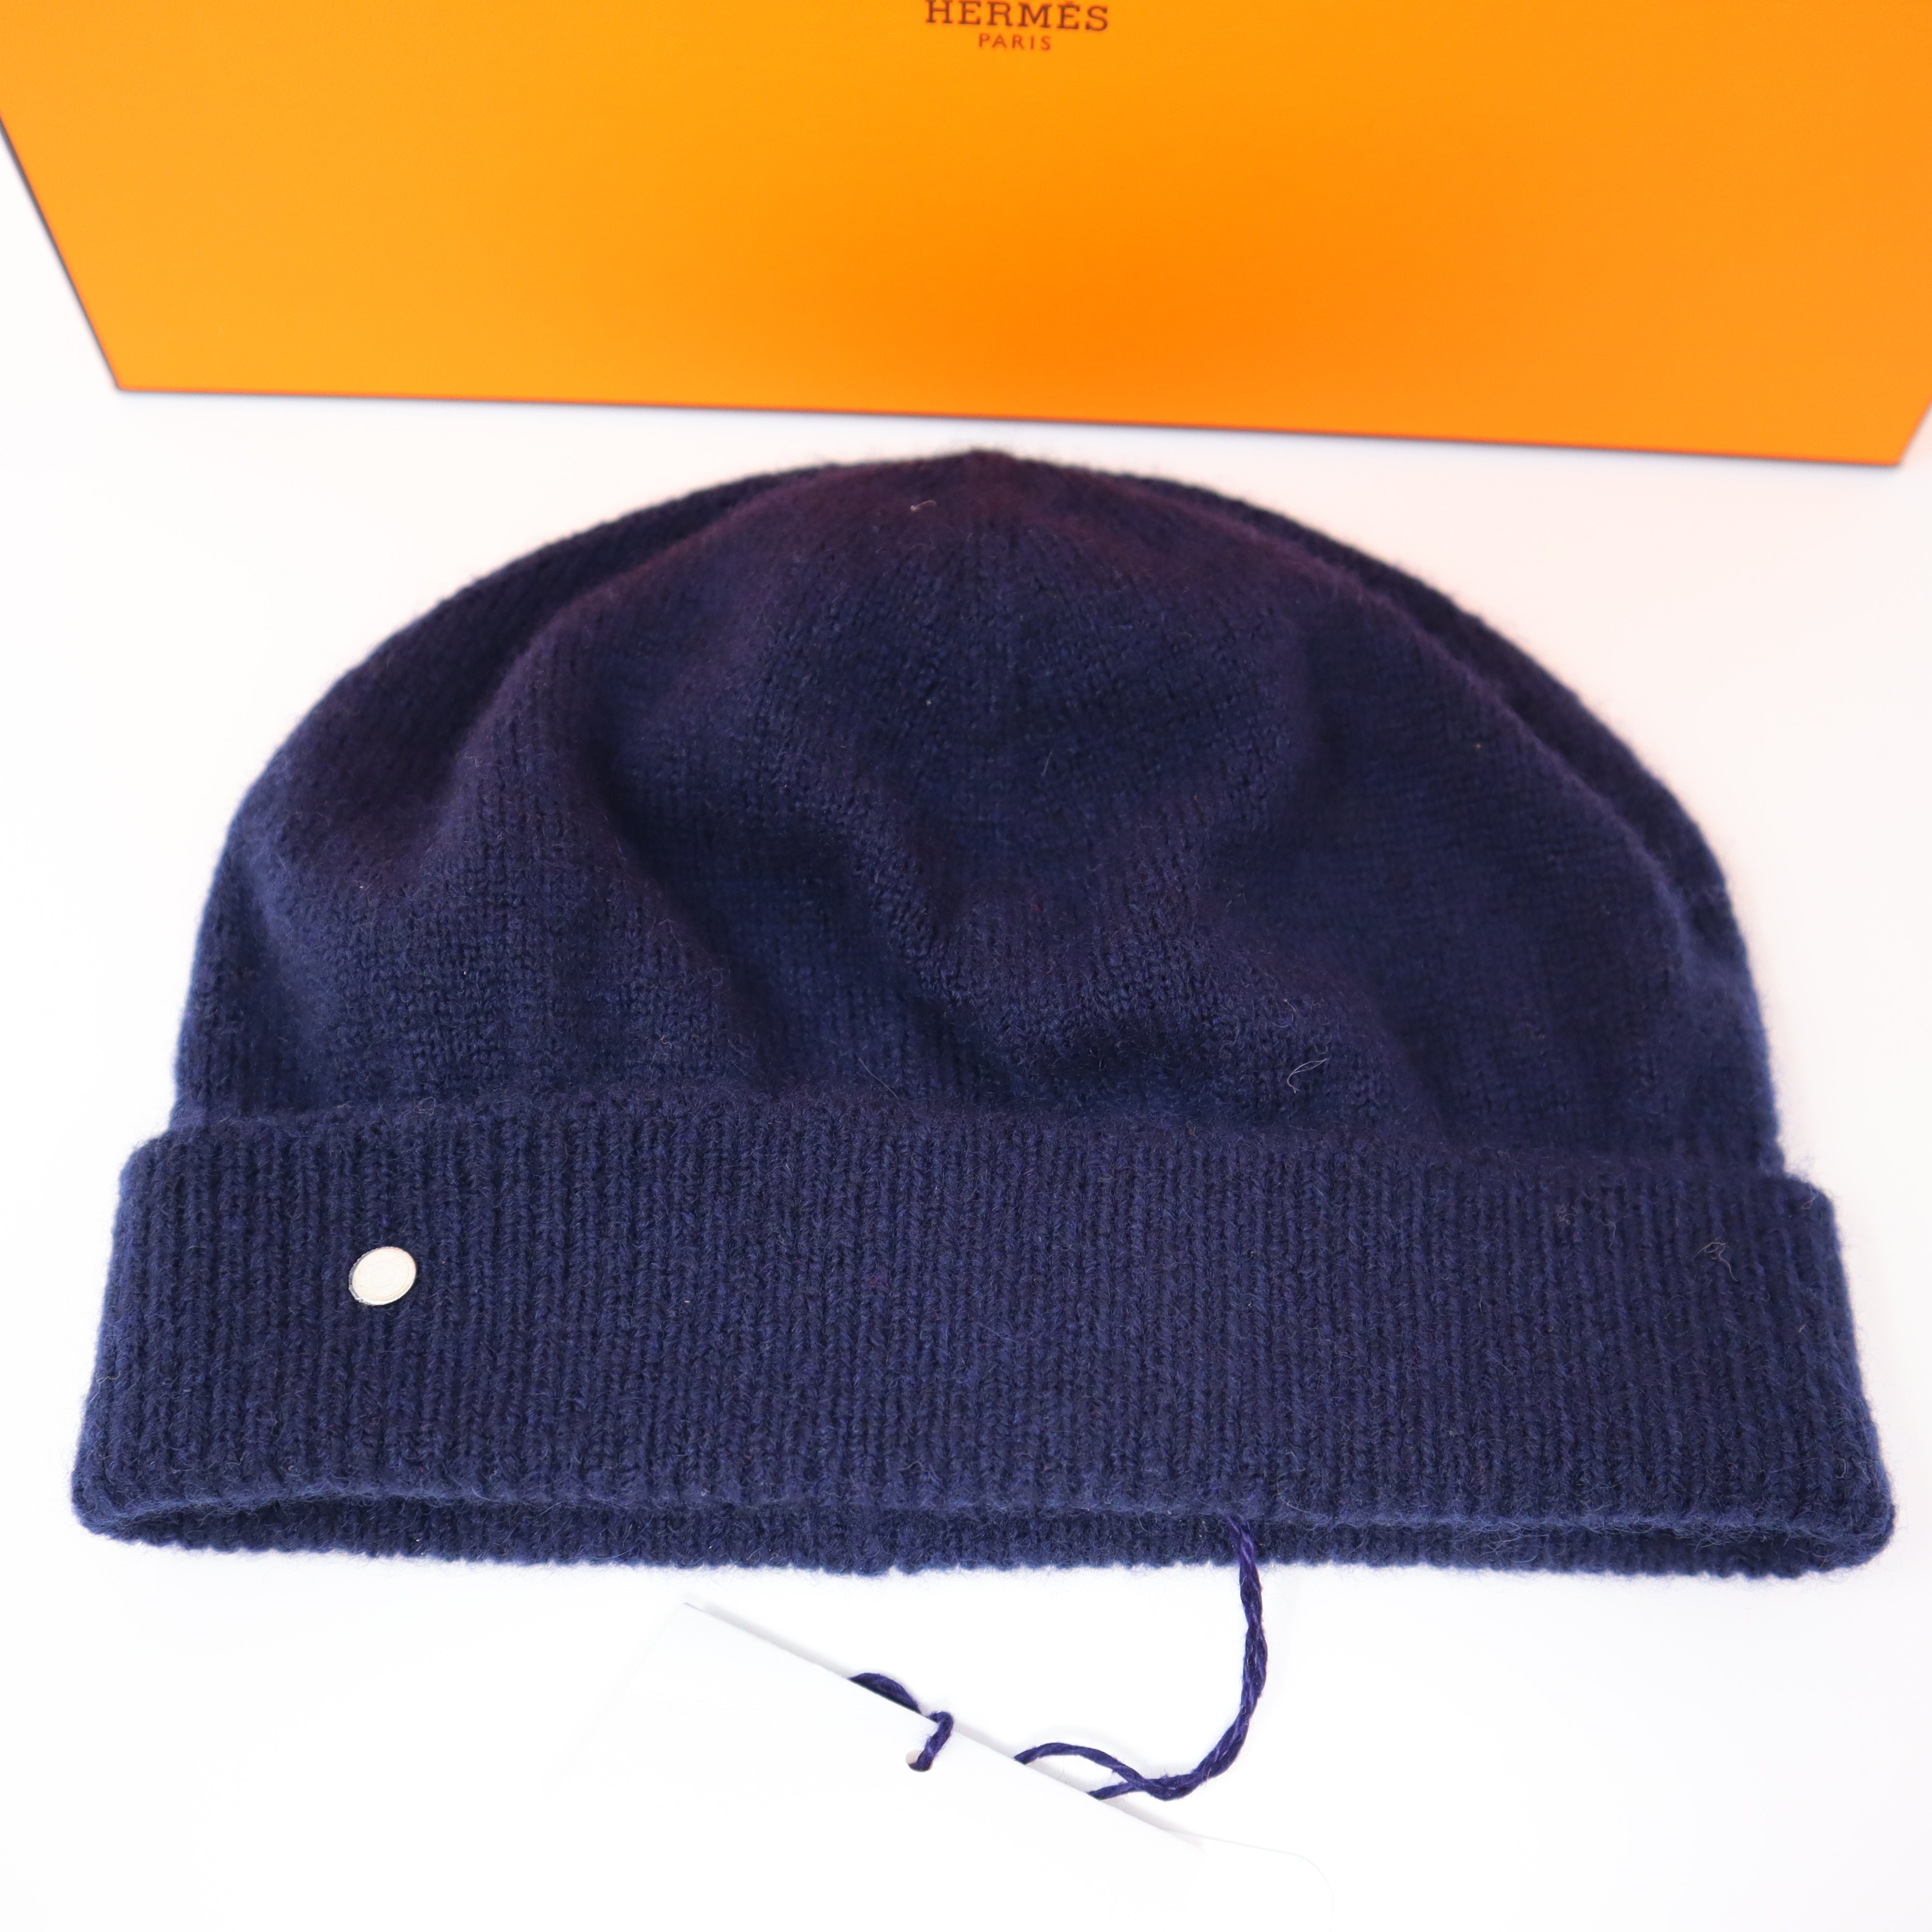 NEW HERMES HAT WOMEN CLASSIC Beanie Frequency Bonnet Femme Maille